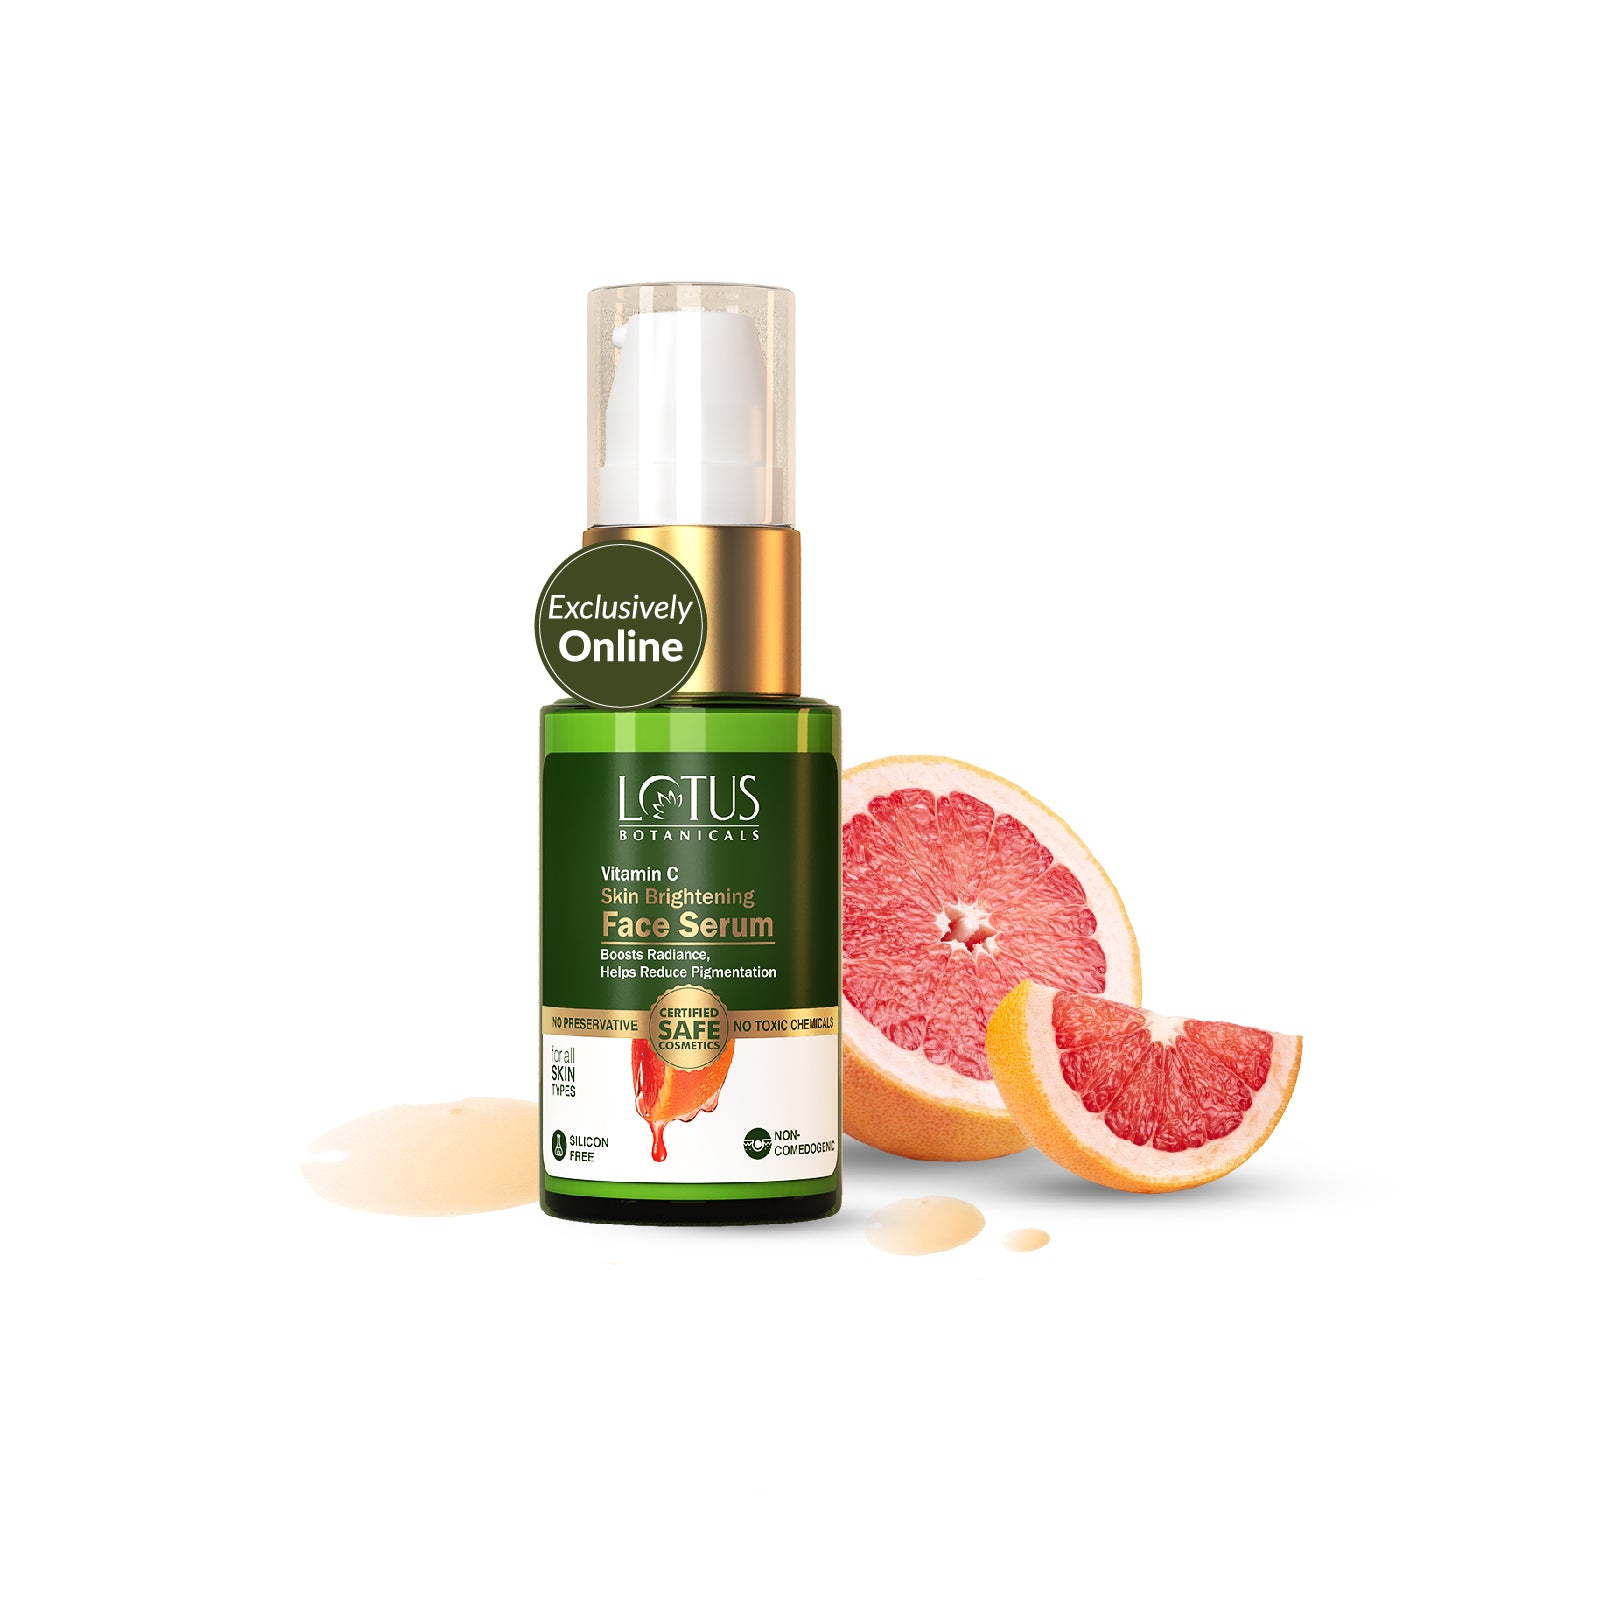 Vibrant and Effortless Skin with Vitamin C Skin Brightening Face Serum